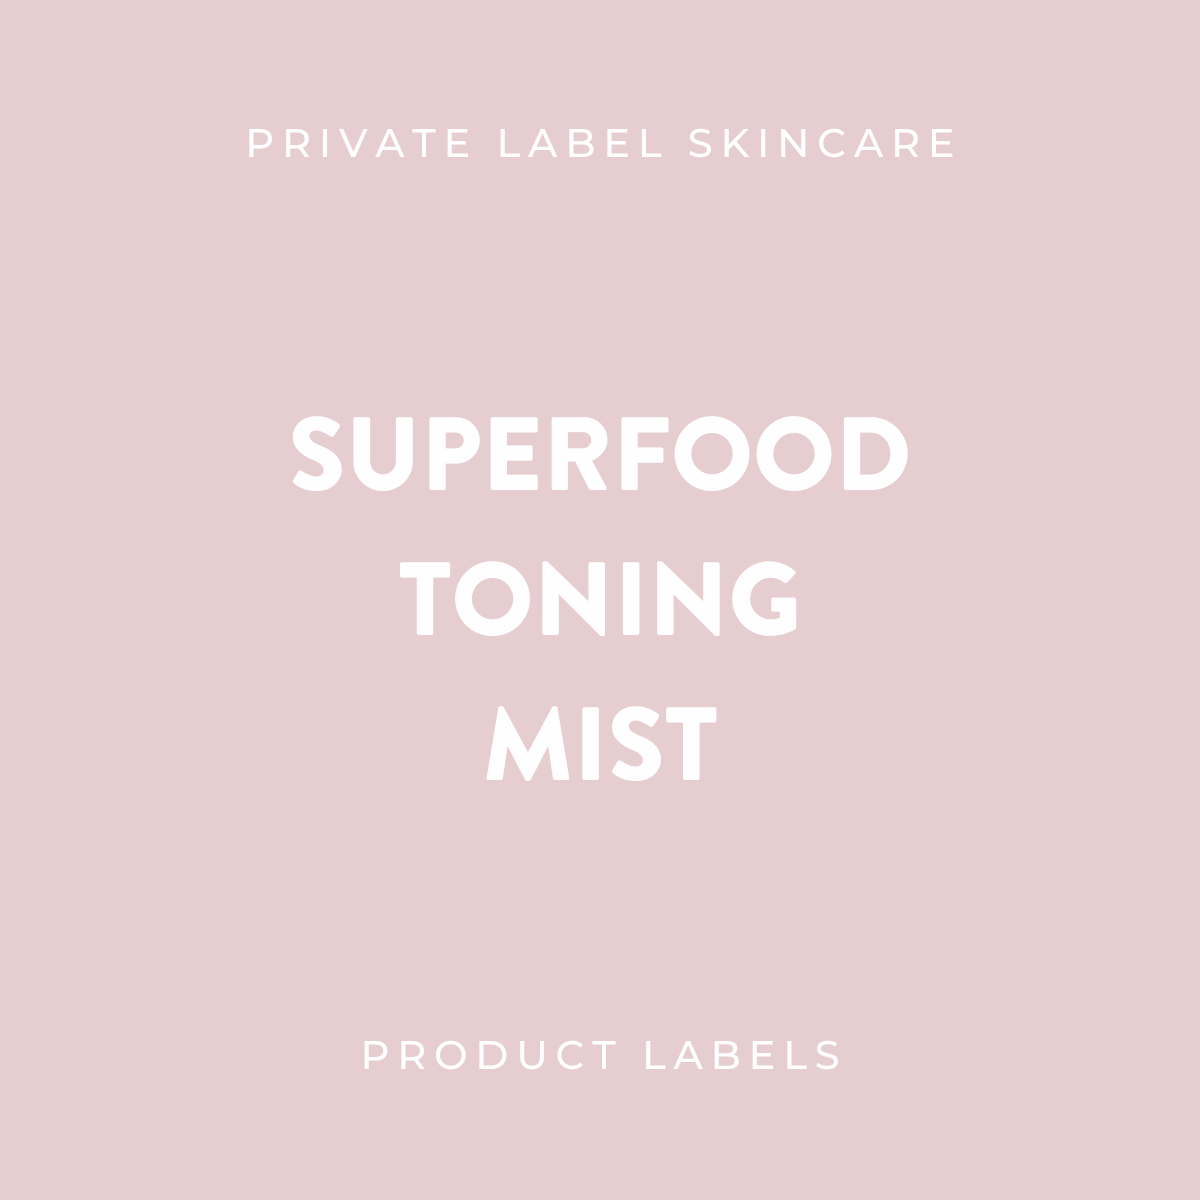 Superfood Toning Mist Product Labels (x 20 labels)